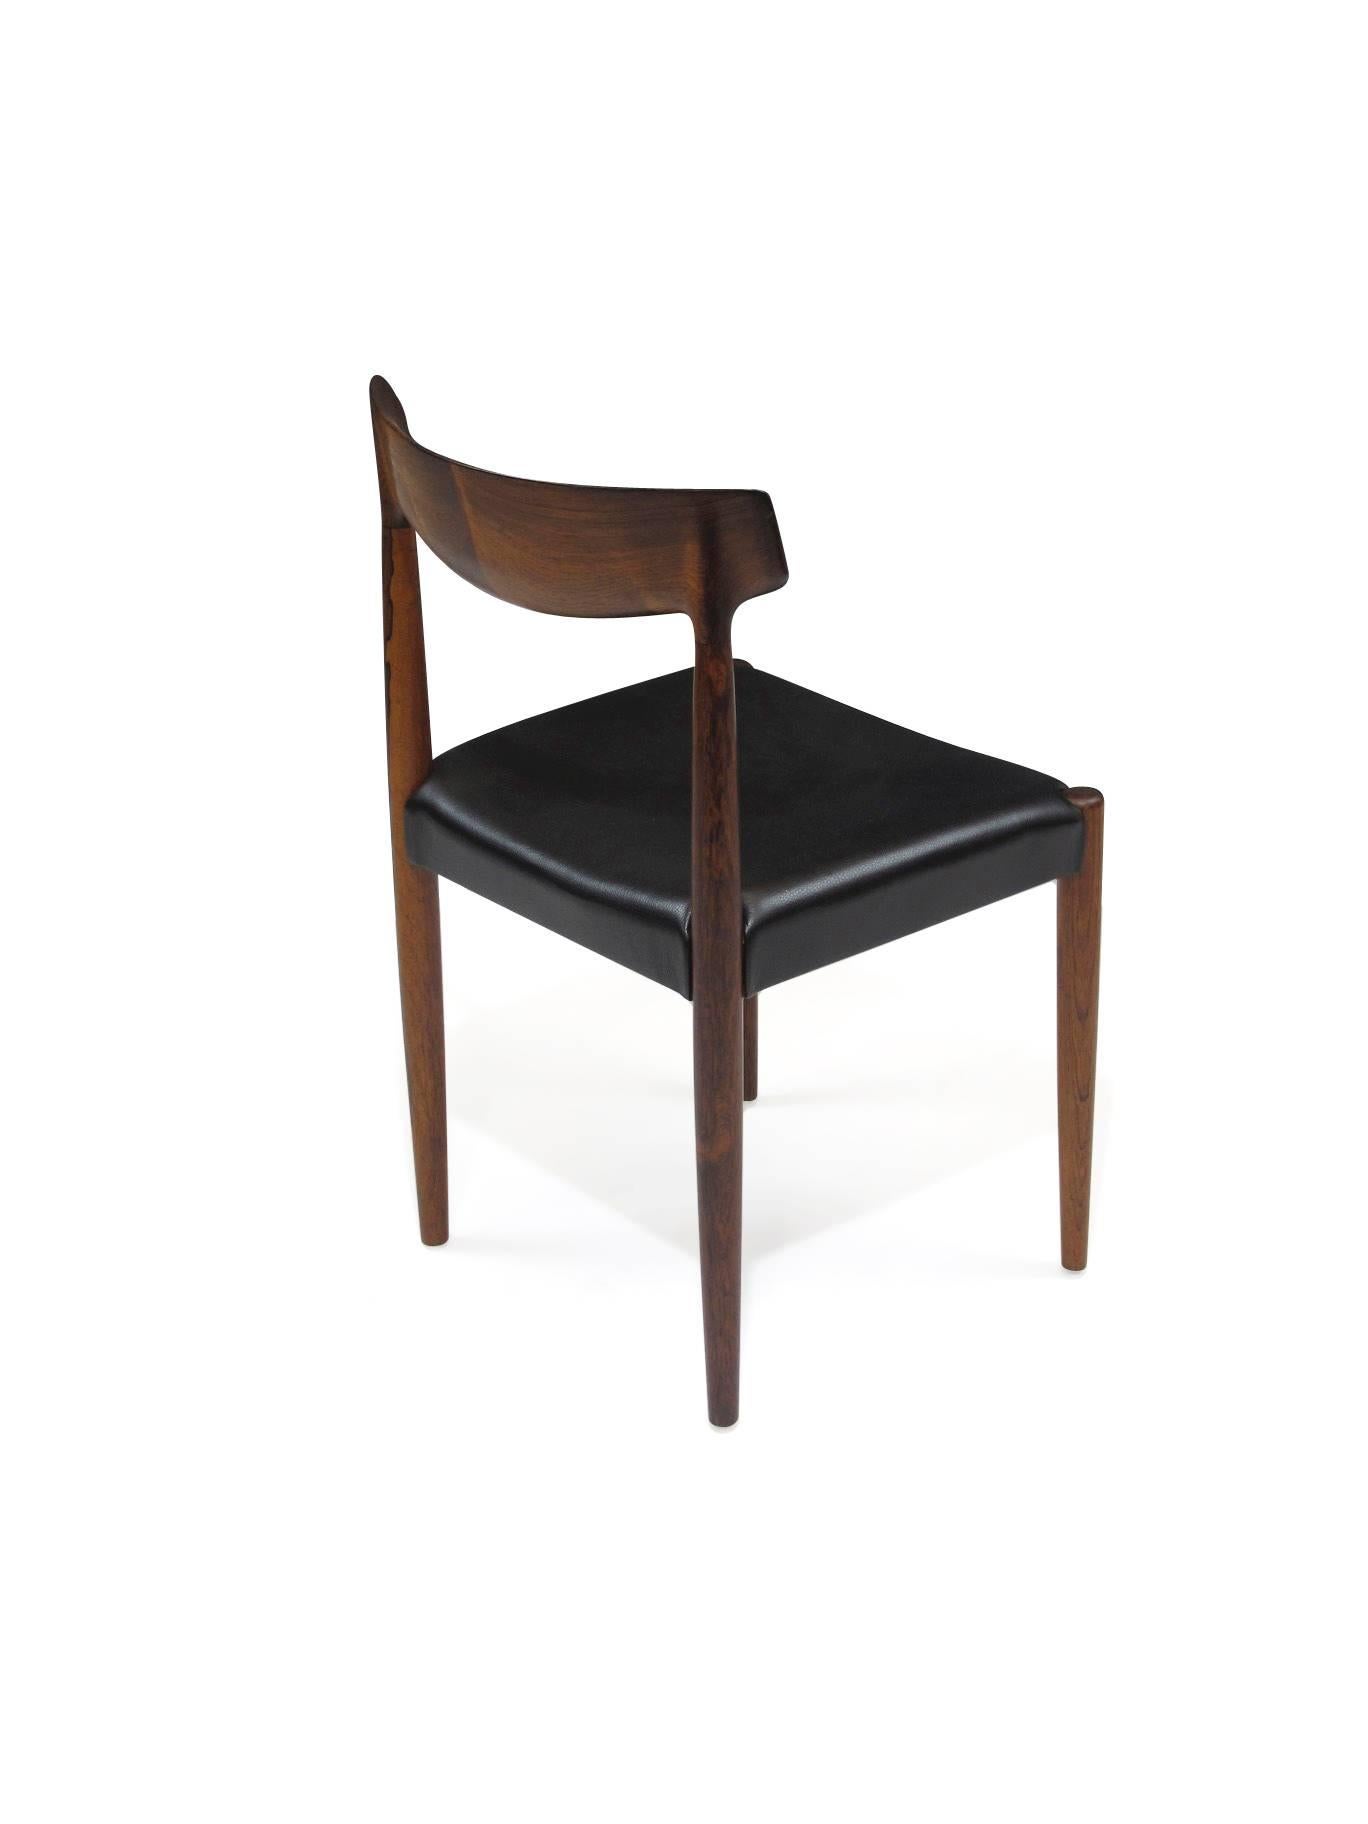 Six Mid-Century Brazilian rosewood dining chairs designed by Knud Faerch for Slagelse, Denmark, model #343. Exquisite solid rosewood with hand-carved backs, finely joined in centre for book-matched effect. Professionally restored and upholstered in